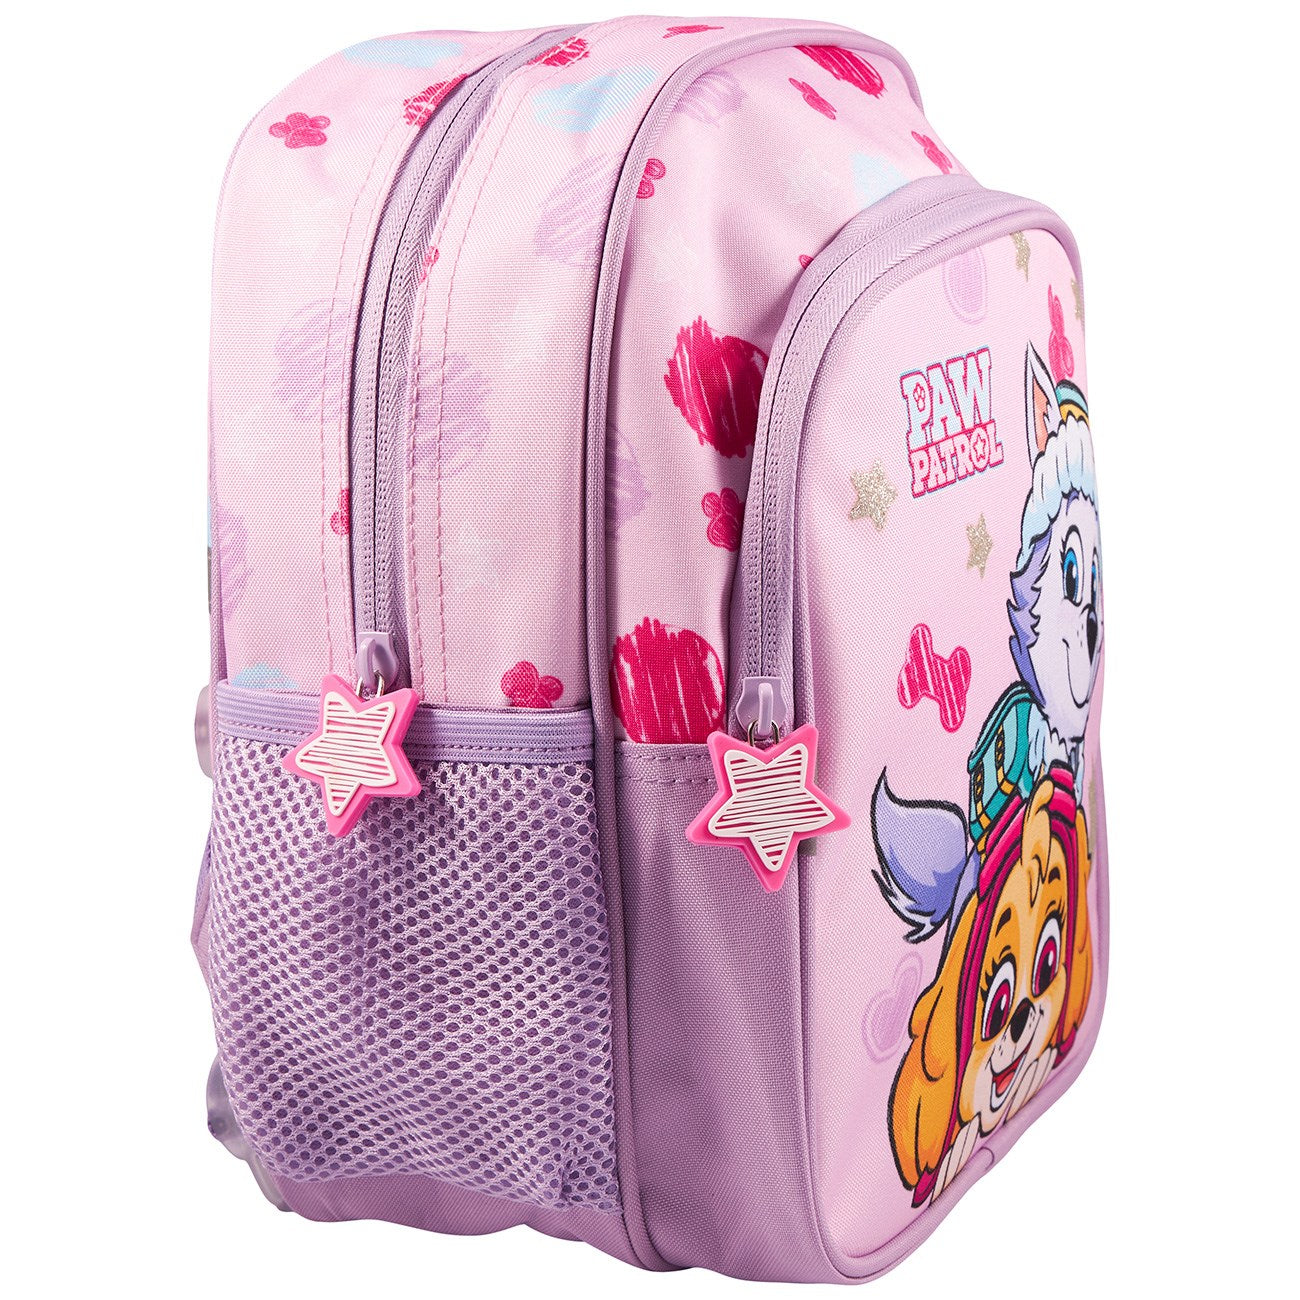 Euromic Paw Patrol Girls Pink Small Backpack 2